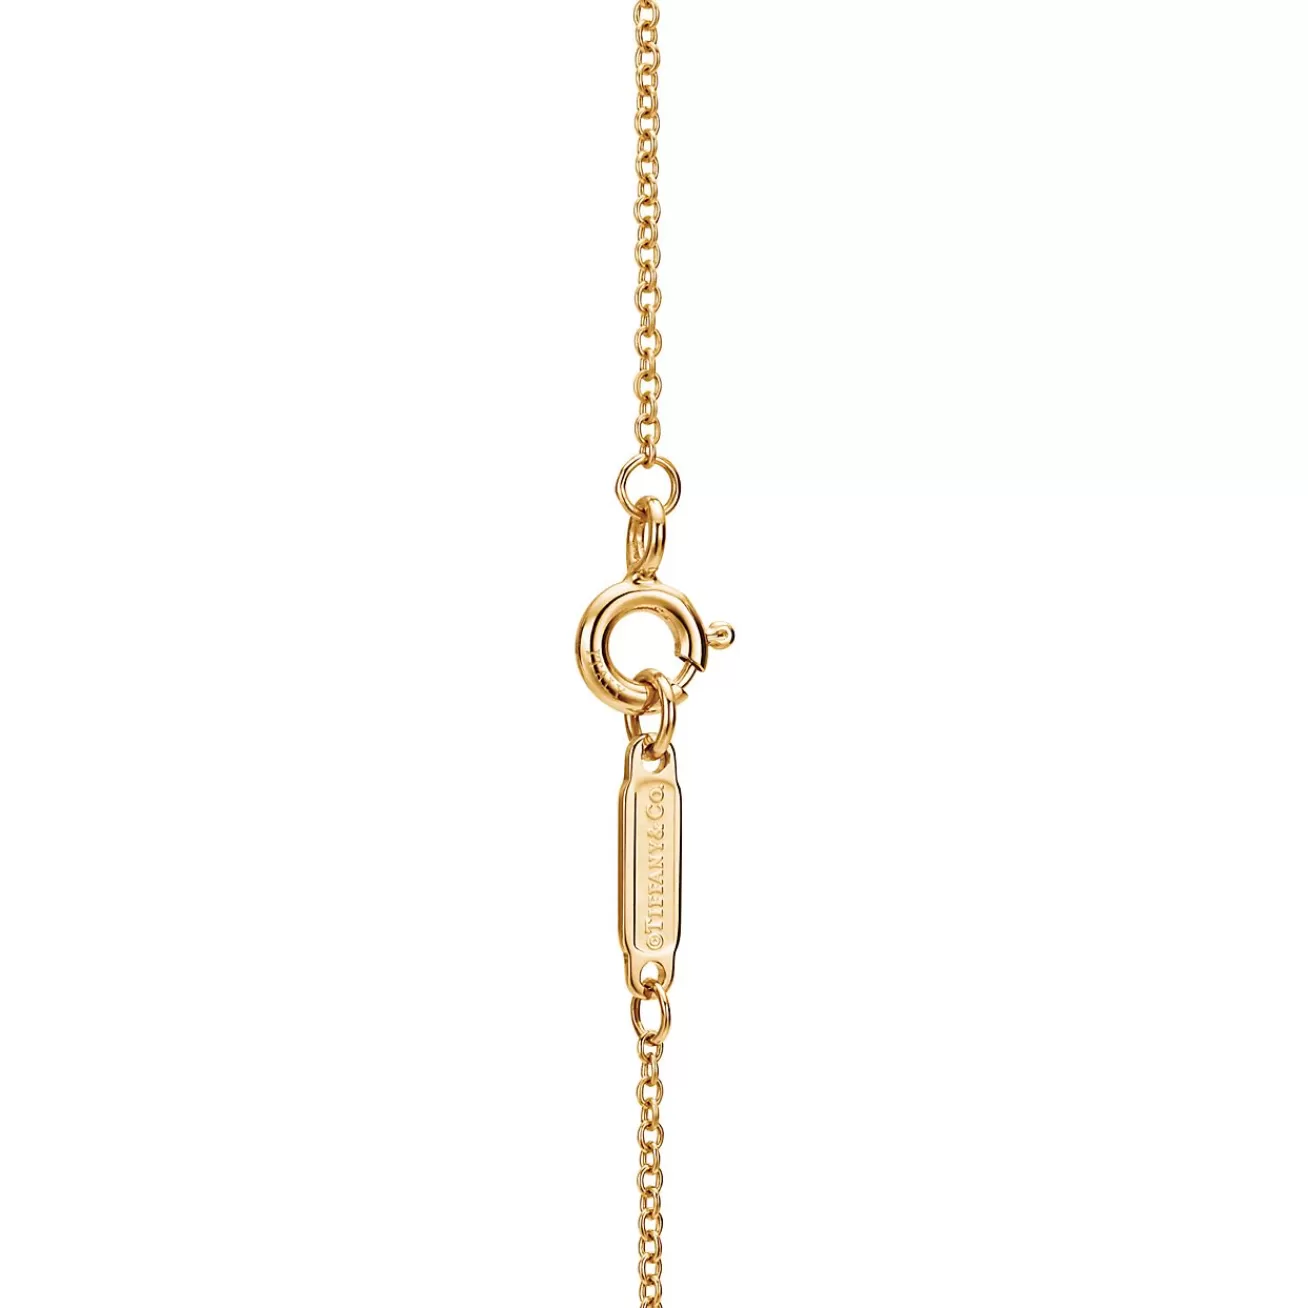 Tiffany & Co. Shop 18K Gold Chain Necklace in 30" Length | ^ Necklaces & Pendants | Men's Jewelry